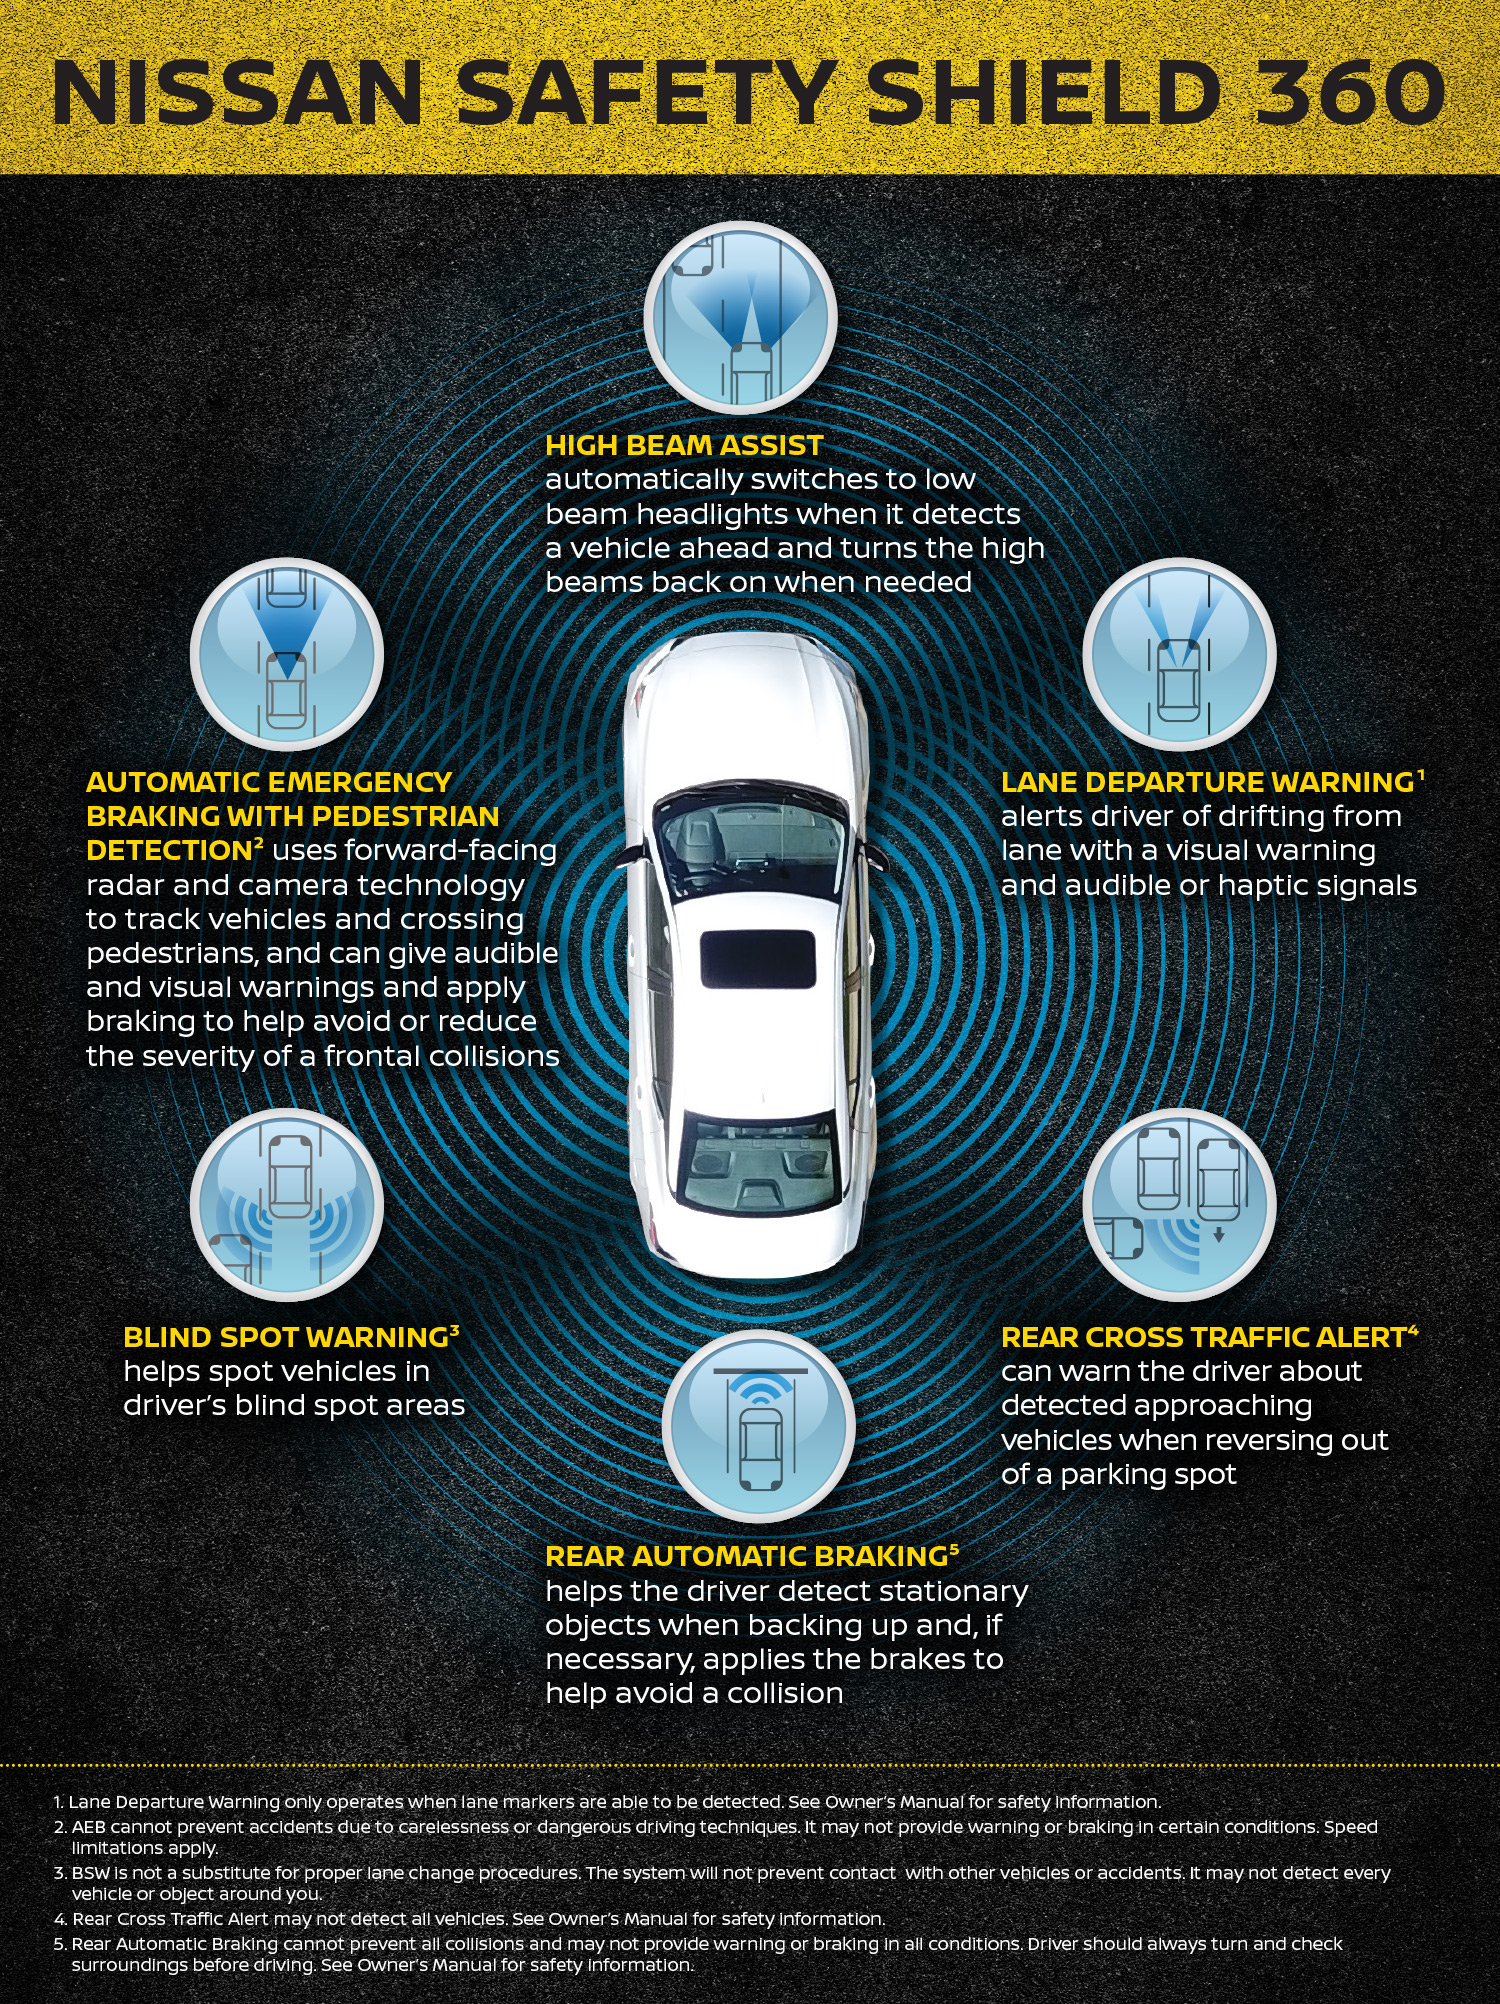 Infographic: Nissan Intelligent Mobility vision to bring ‘Safety Shield 360’ to top-selling models